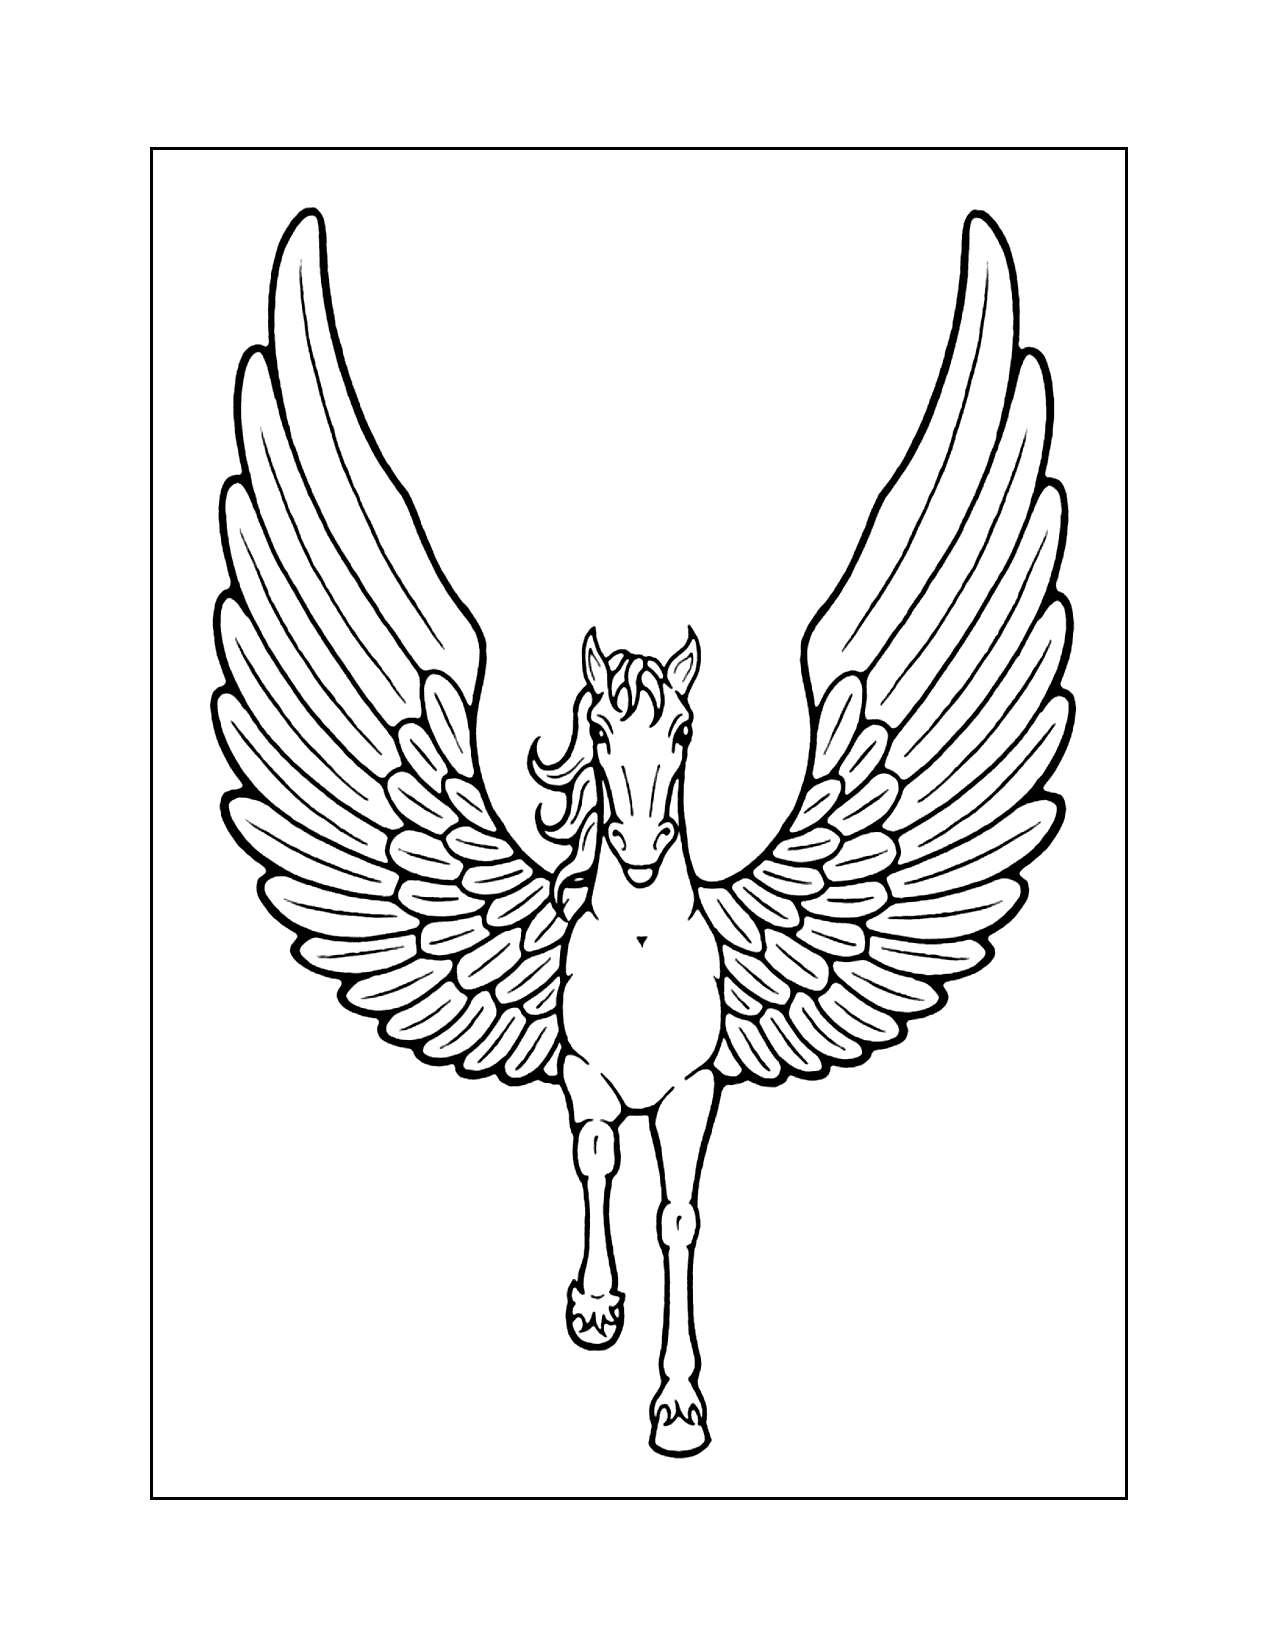 Pegasus Winged Horse Coloring Page